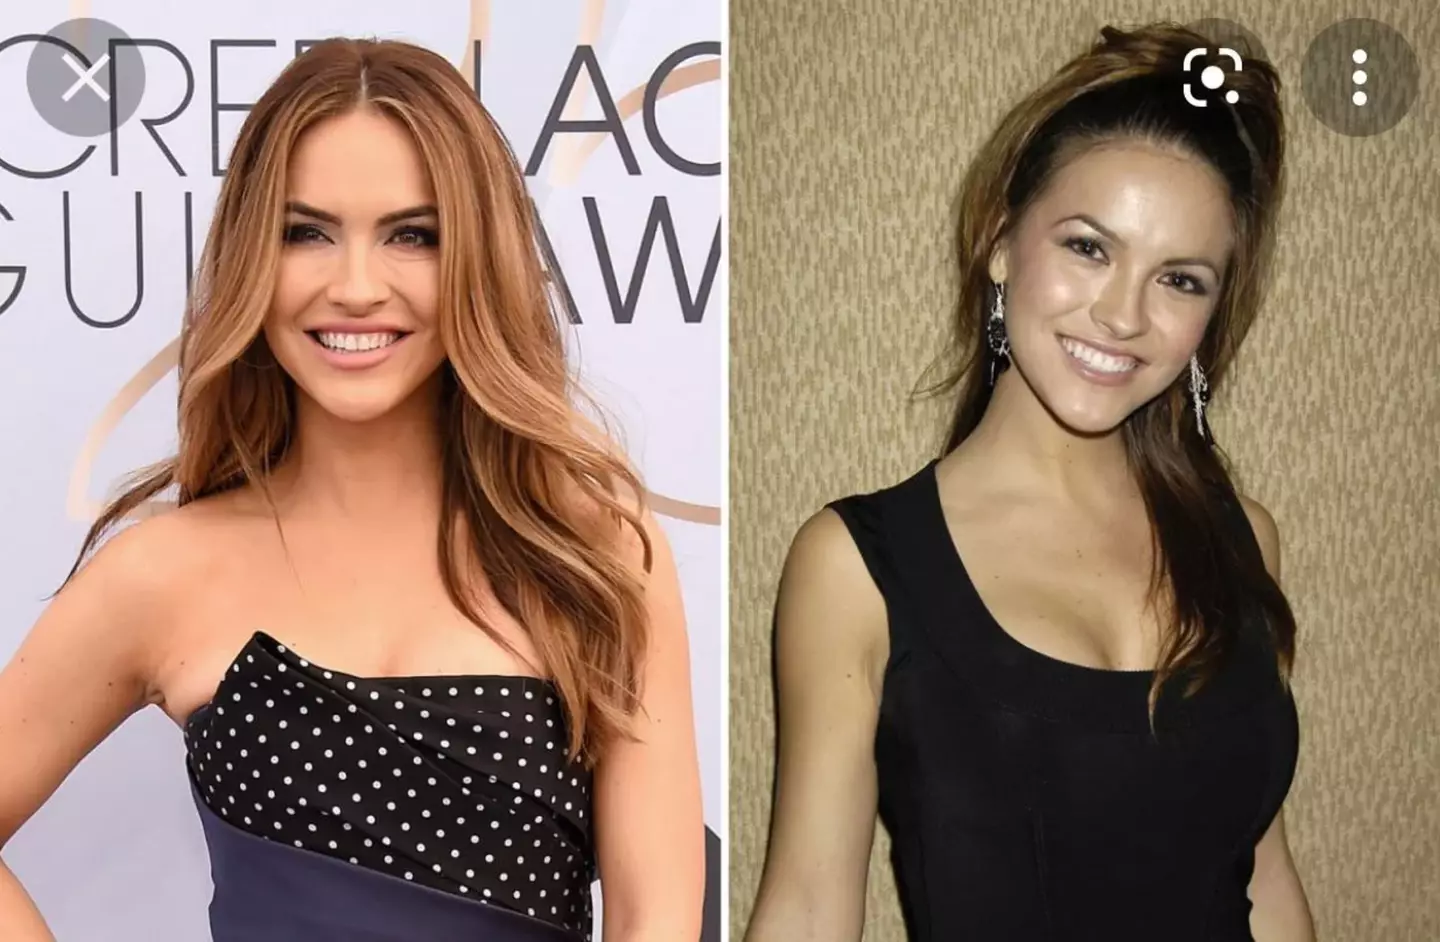 Fans say Chrishell looks totally different (